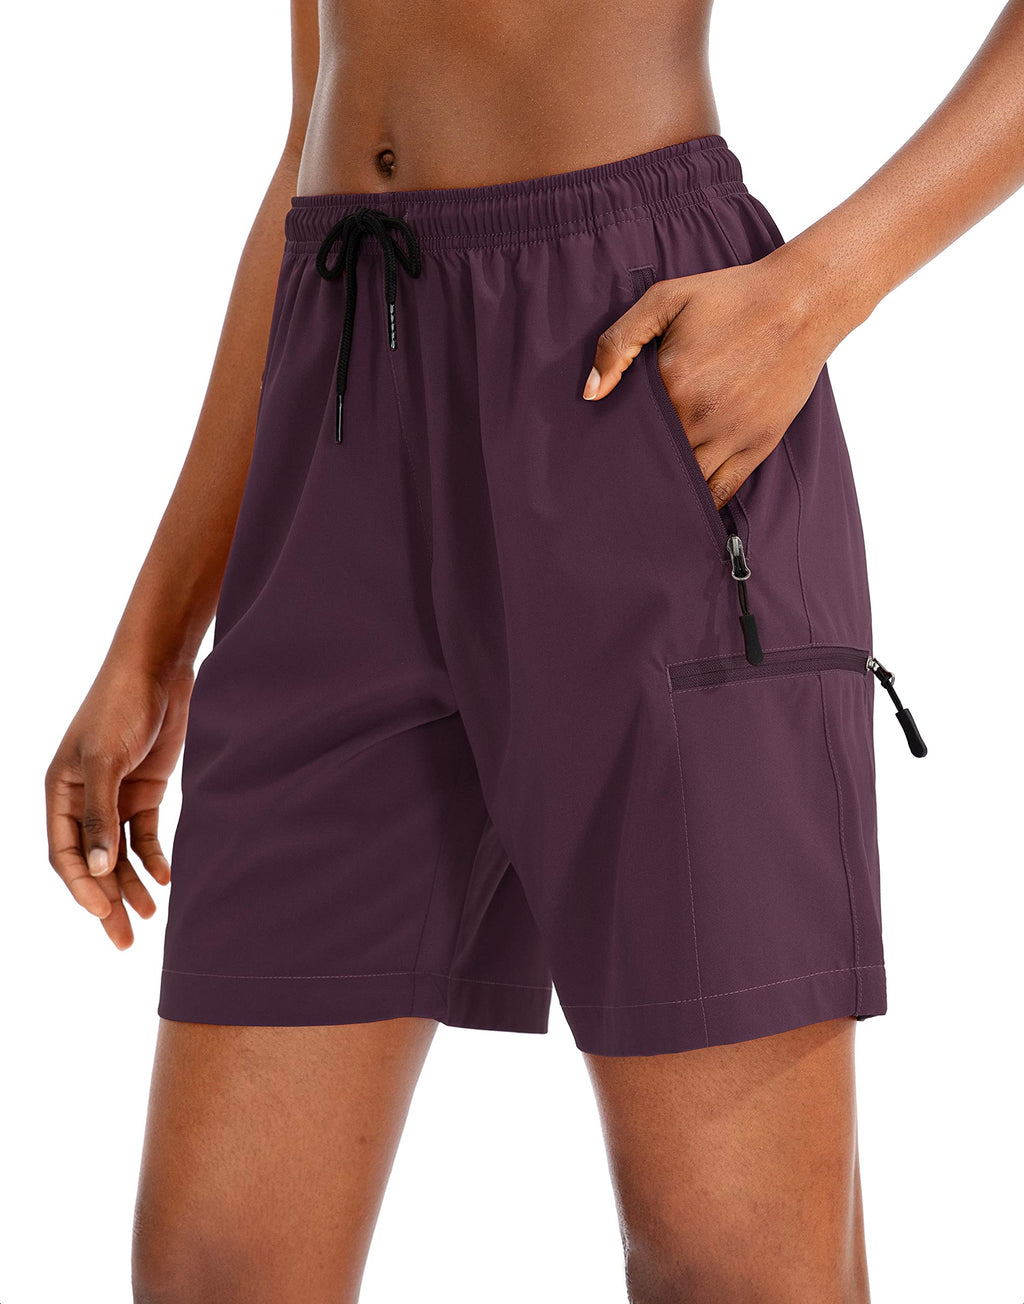 SANTINY Women's Hiking Cargo Shorts Quick Dry Lightweight Summer Shorts for Women Travel Athletic Golf with Zipper Pockets Purple XX-Large - BeesActive Australia